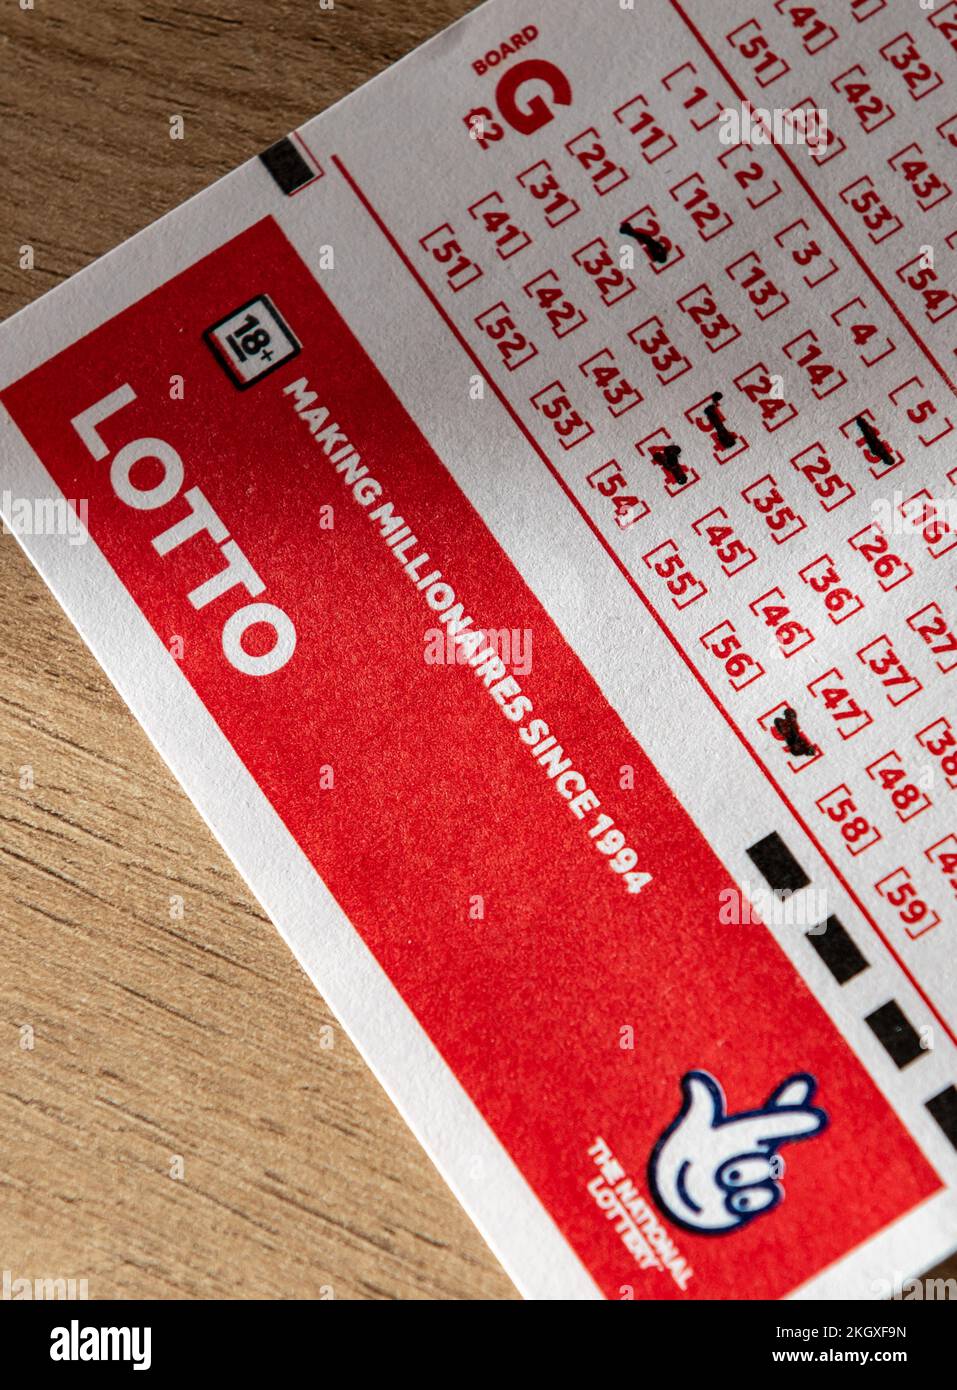 London. UK- 11.20.2022. A close up of a lottery coupon showing the lotto name and National Lottery trademark. Stock Photo